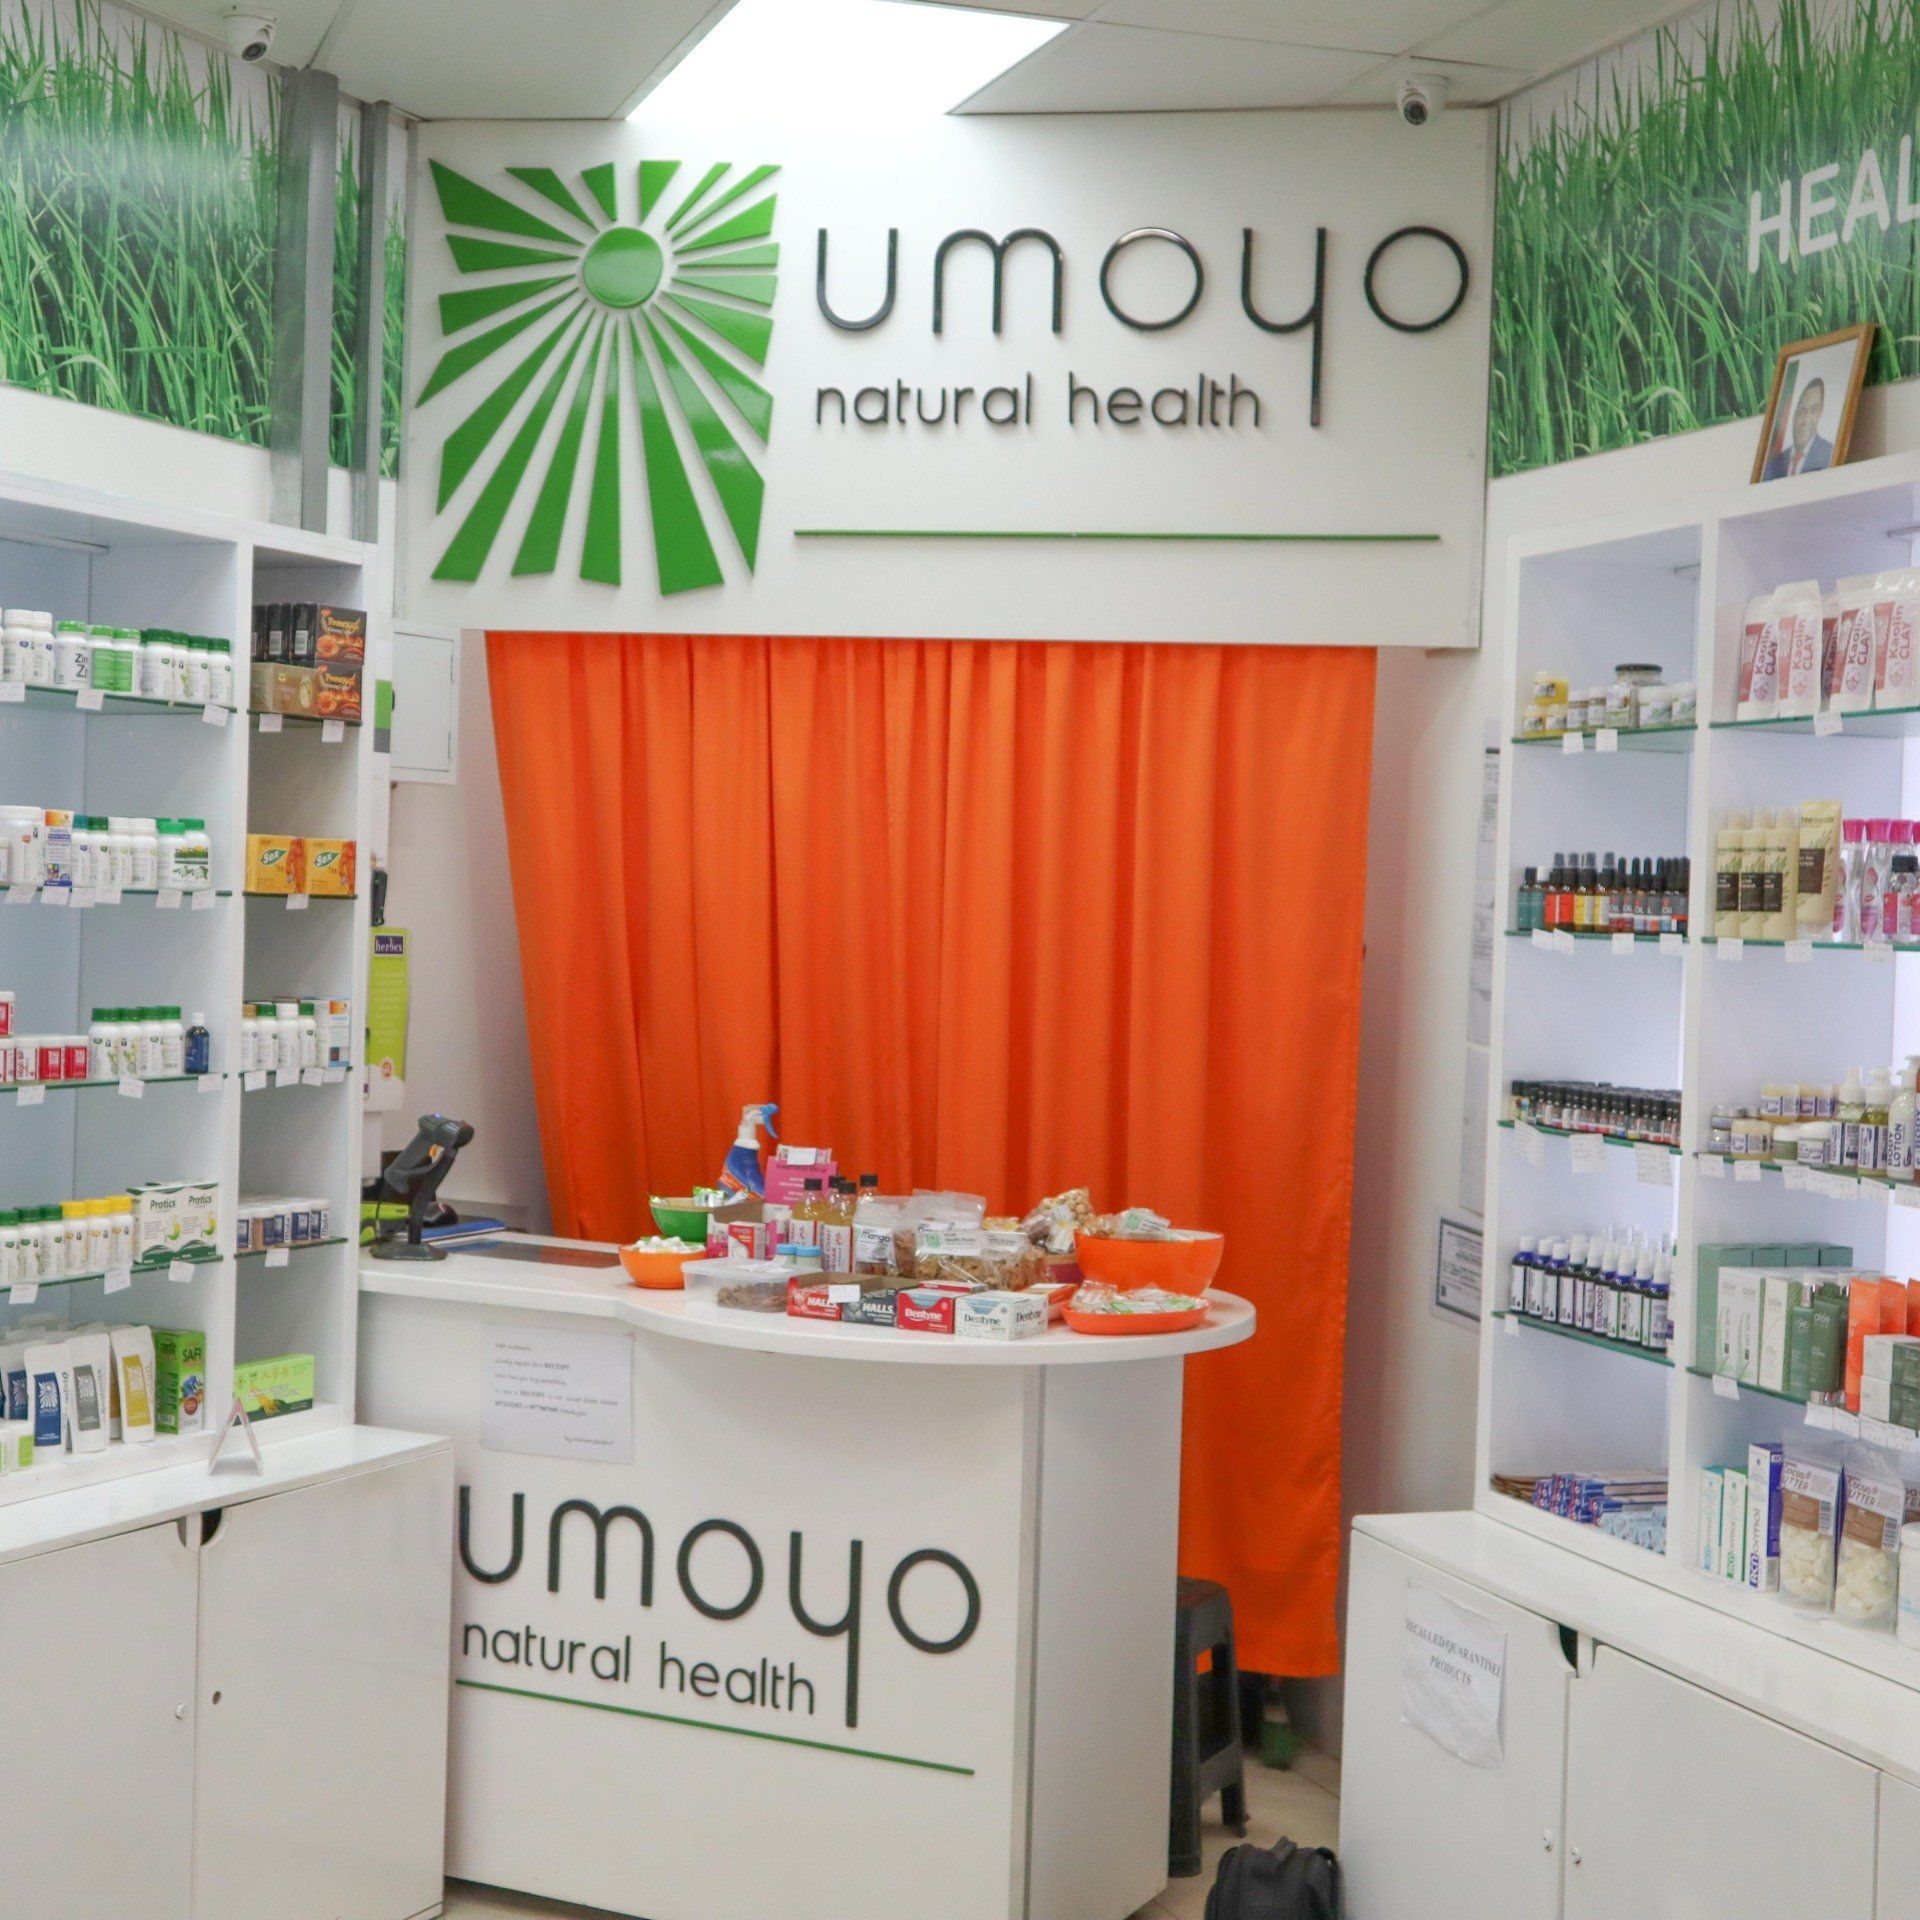 A store with a sign that says umoyo natural health